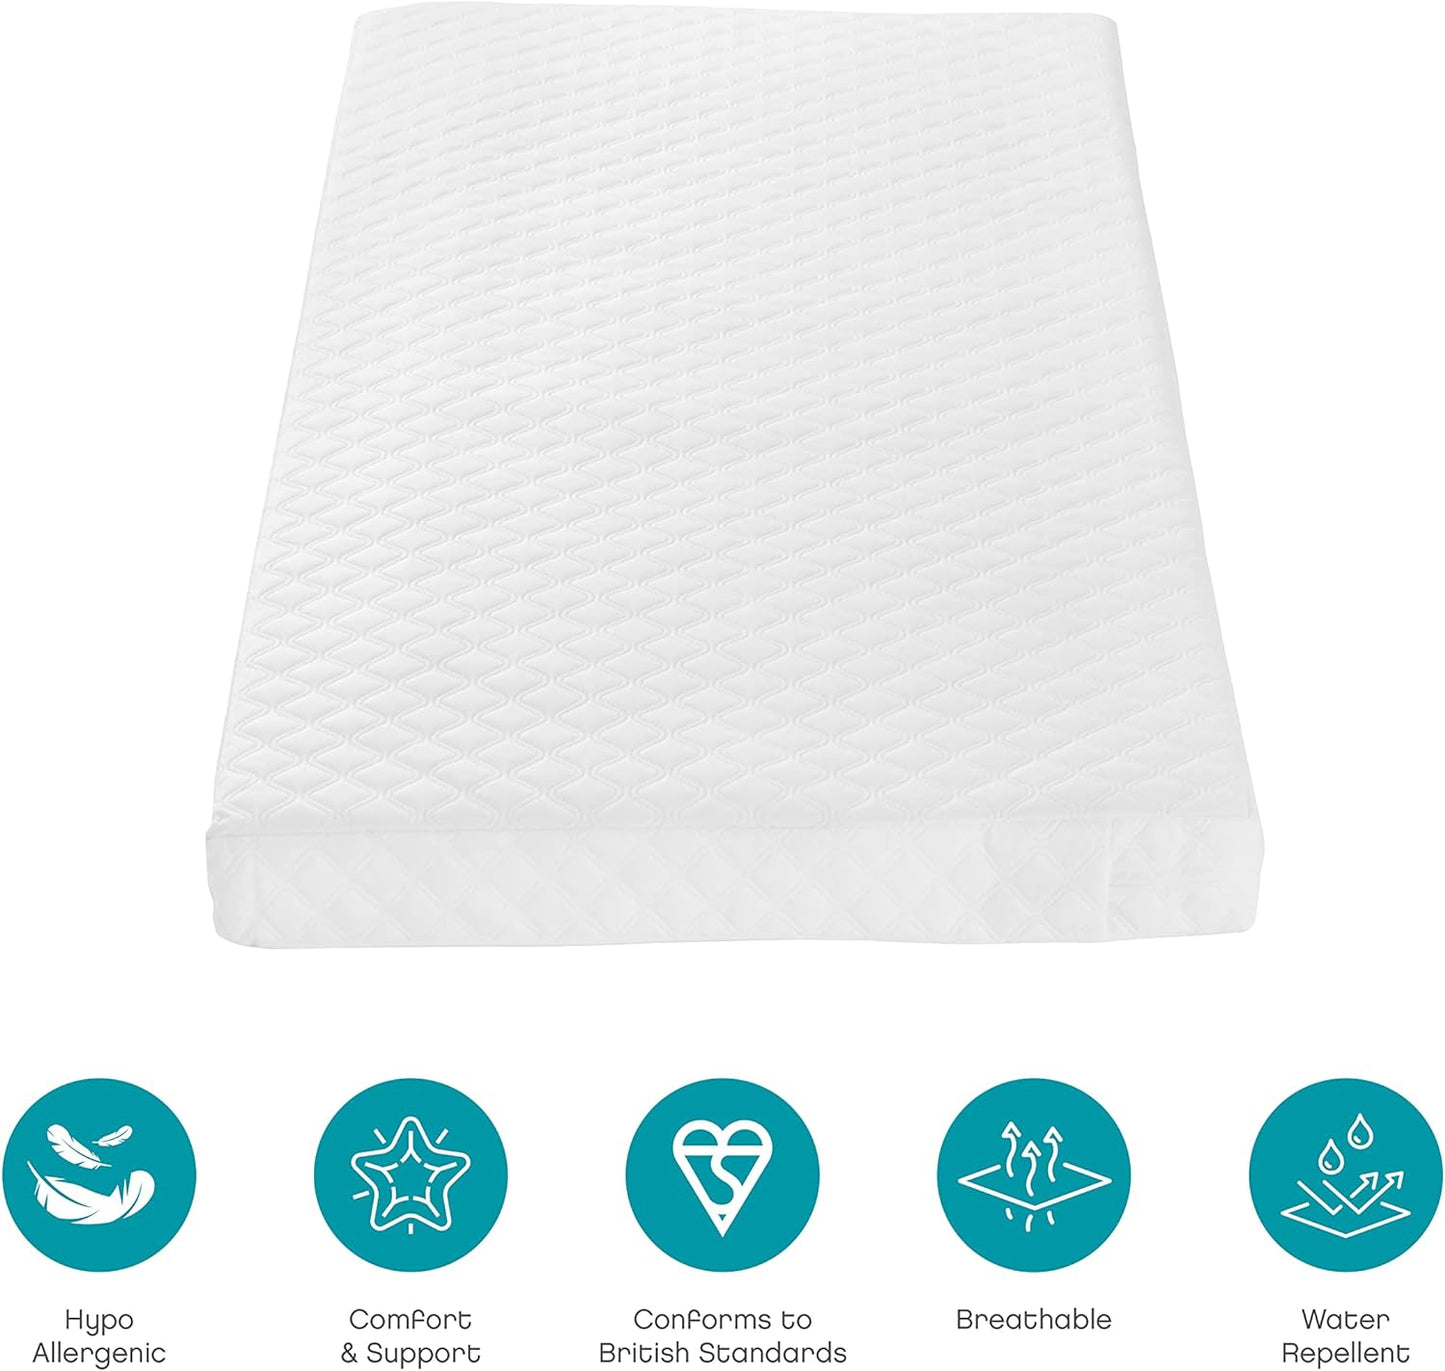 Extra Thick Breathable Fully Spring/Sprung COT Bed Mattress